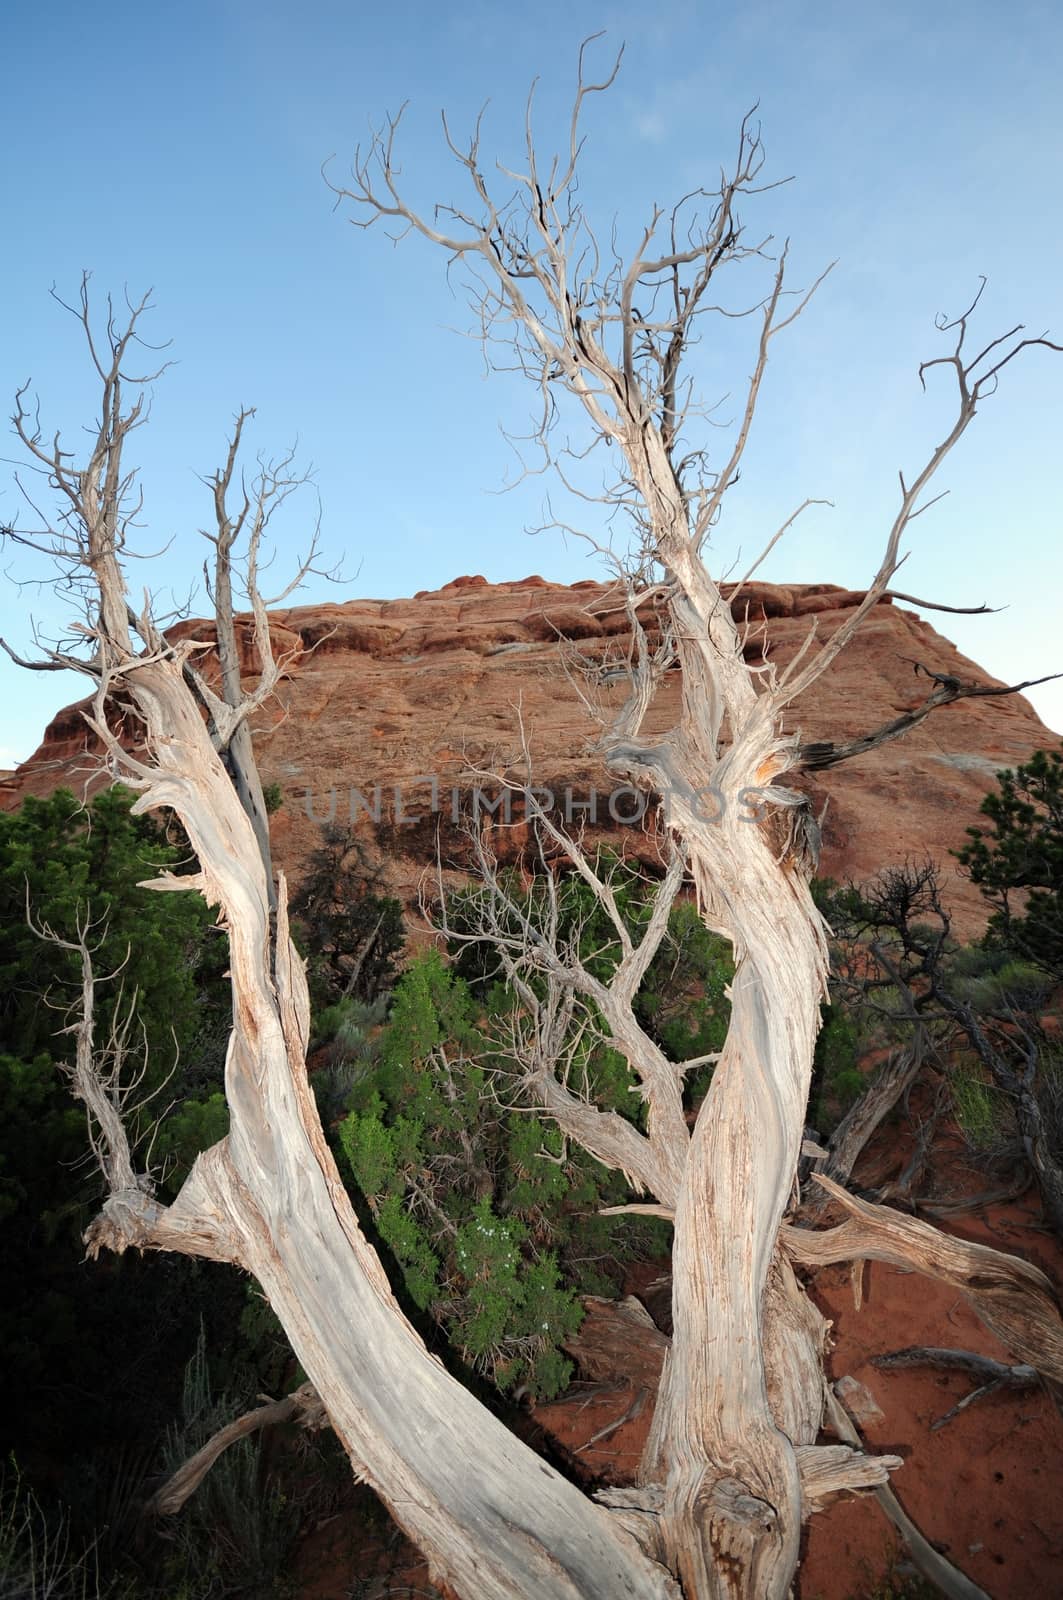 Utah Dead Tree. Arches National Park, Utah, USA. Rocks Formation in the Background